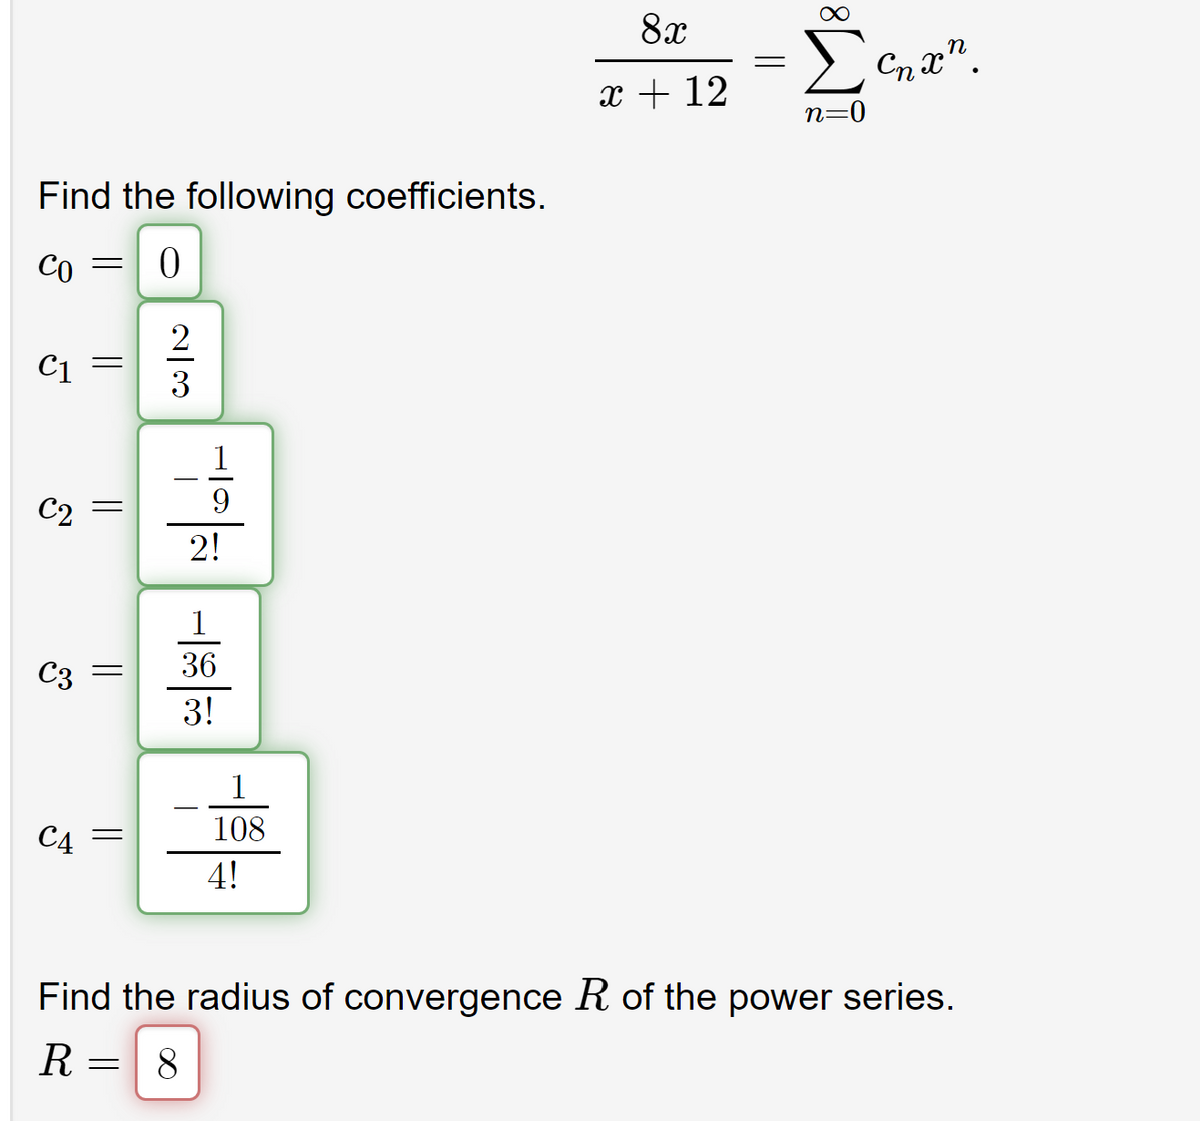 Find the following coefficients.
0
Co =
C1
C2
C3
C4
||
||
||
-
23
=
-10 -18 00
1
108
4!
8x
x + 12
=
8
n=0
Спхп
Find the radius of convergence R of the power series.
R=
8